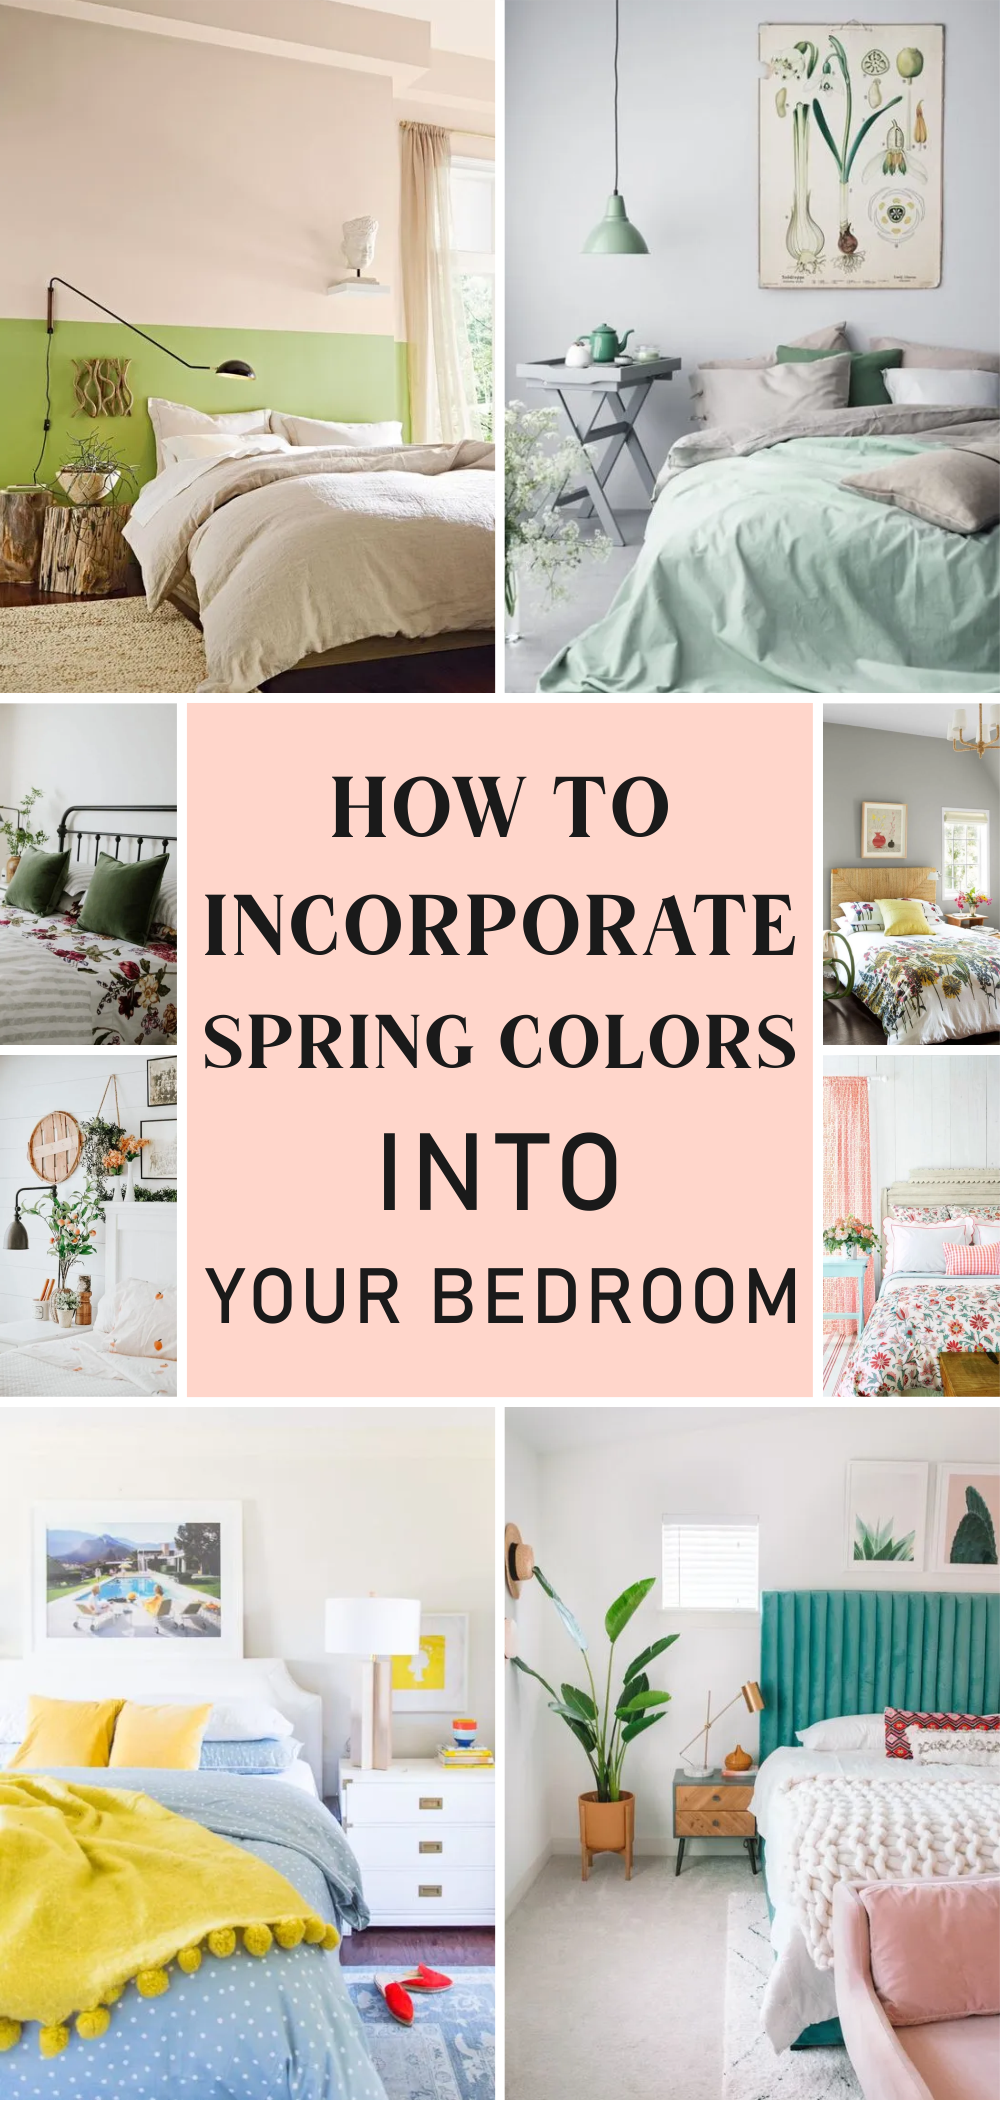 How to Incorporate Spring Colors into Your Bedroom